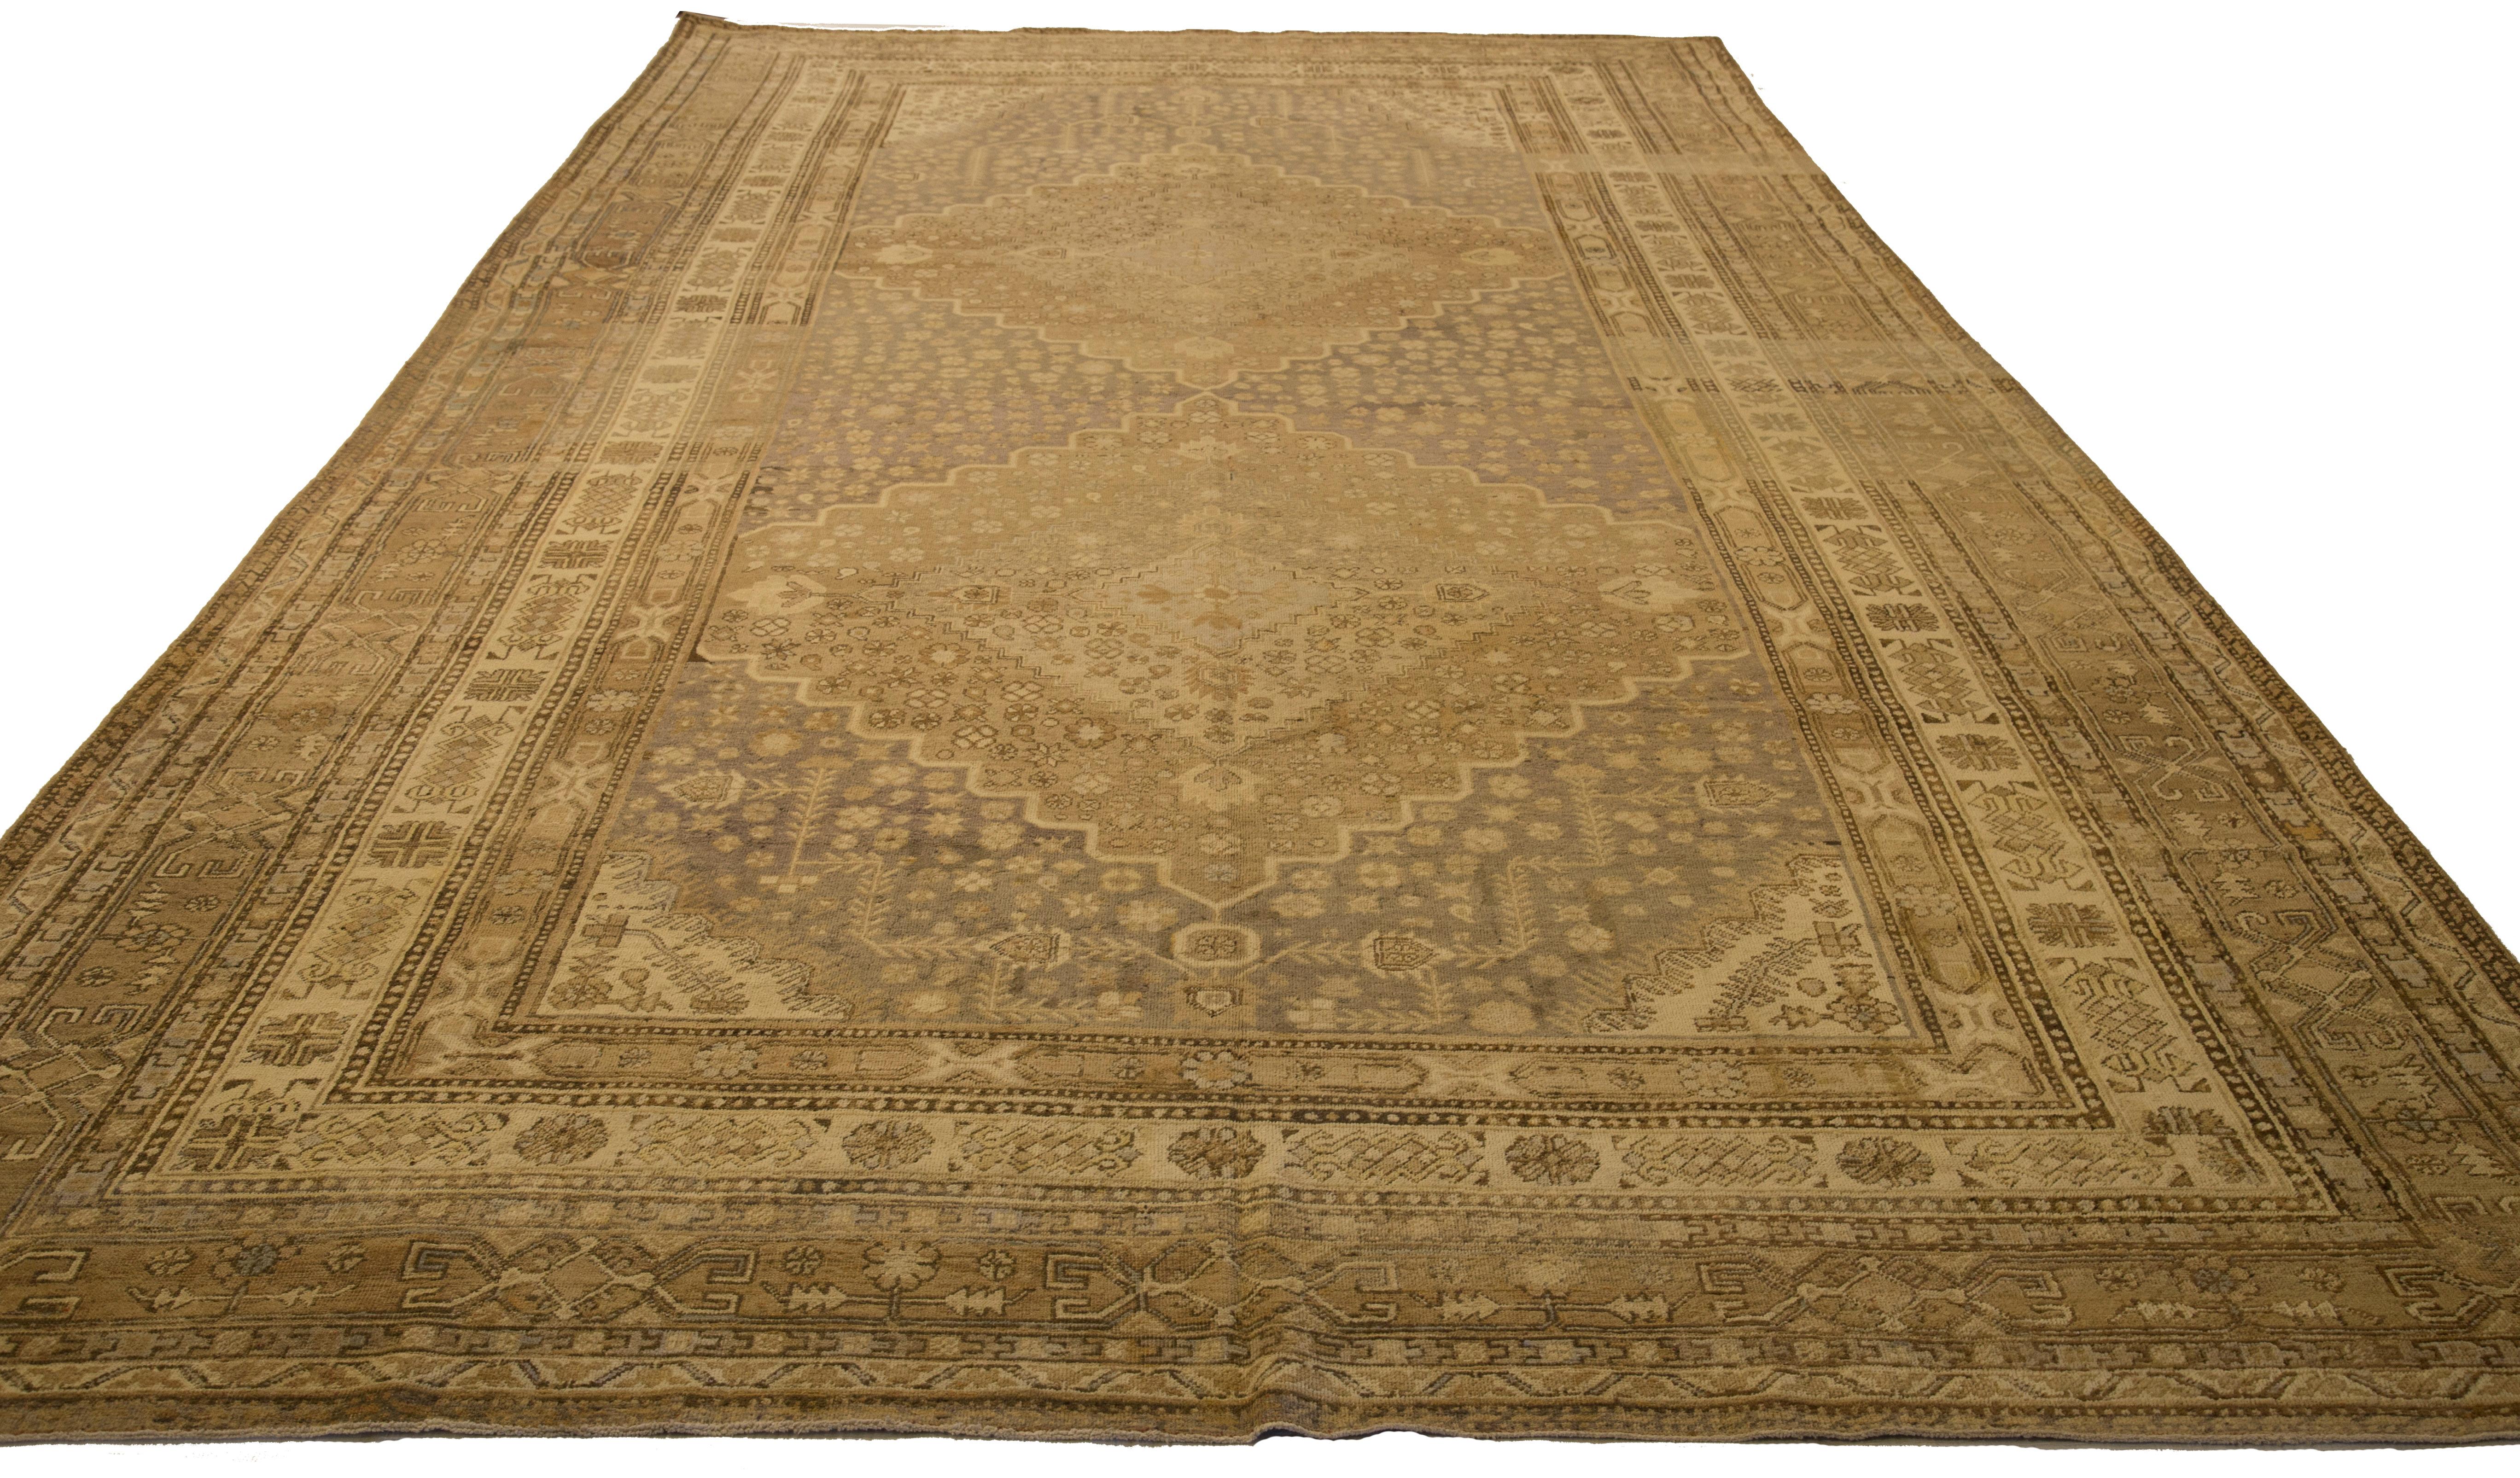 Mid-20th century hand-woven Persian area rug made from fine wool and all-natural vegetable dyes that are safe for people and pets. It features traditional Khotan weaving depicting intricate floral and botanical patterns. 

This area rug has